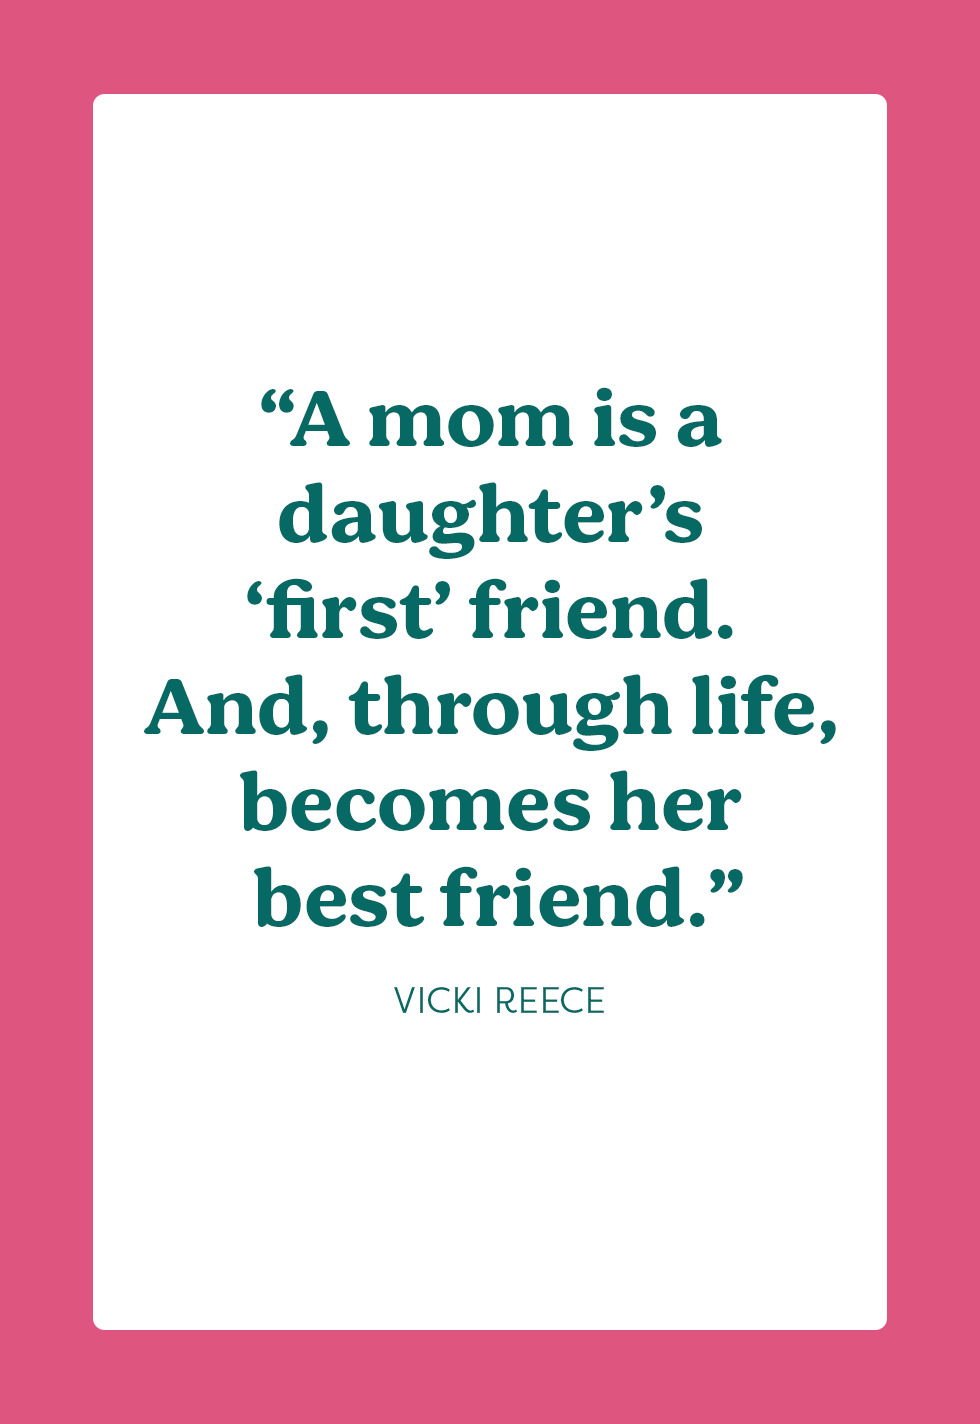 best mother daughter quotes